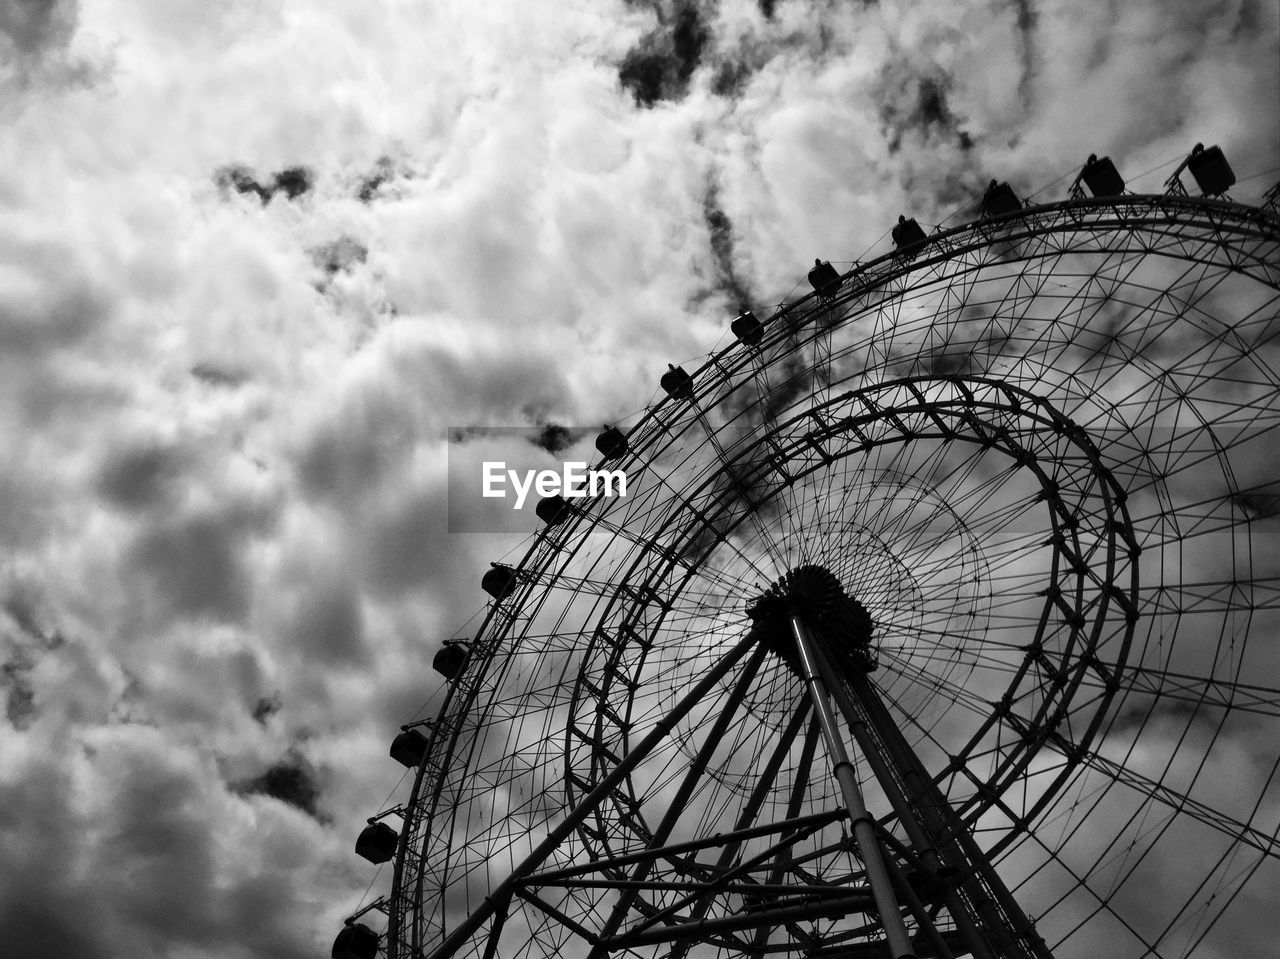 Low angle view of orlando eye against cloudy sky